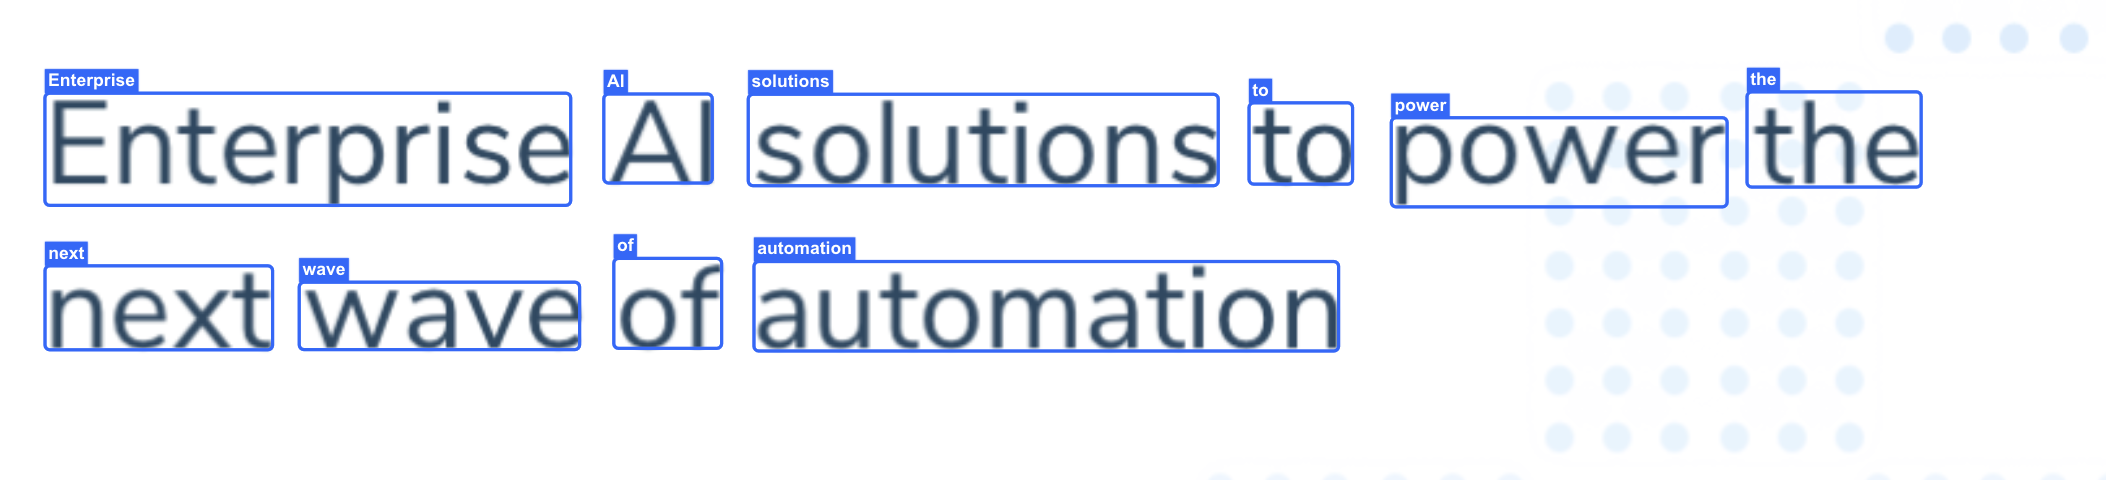 Block Text: "Enterprise Al solutions to power the next wave of automation"